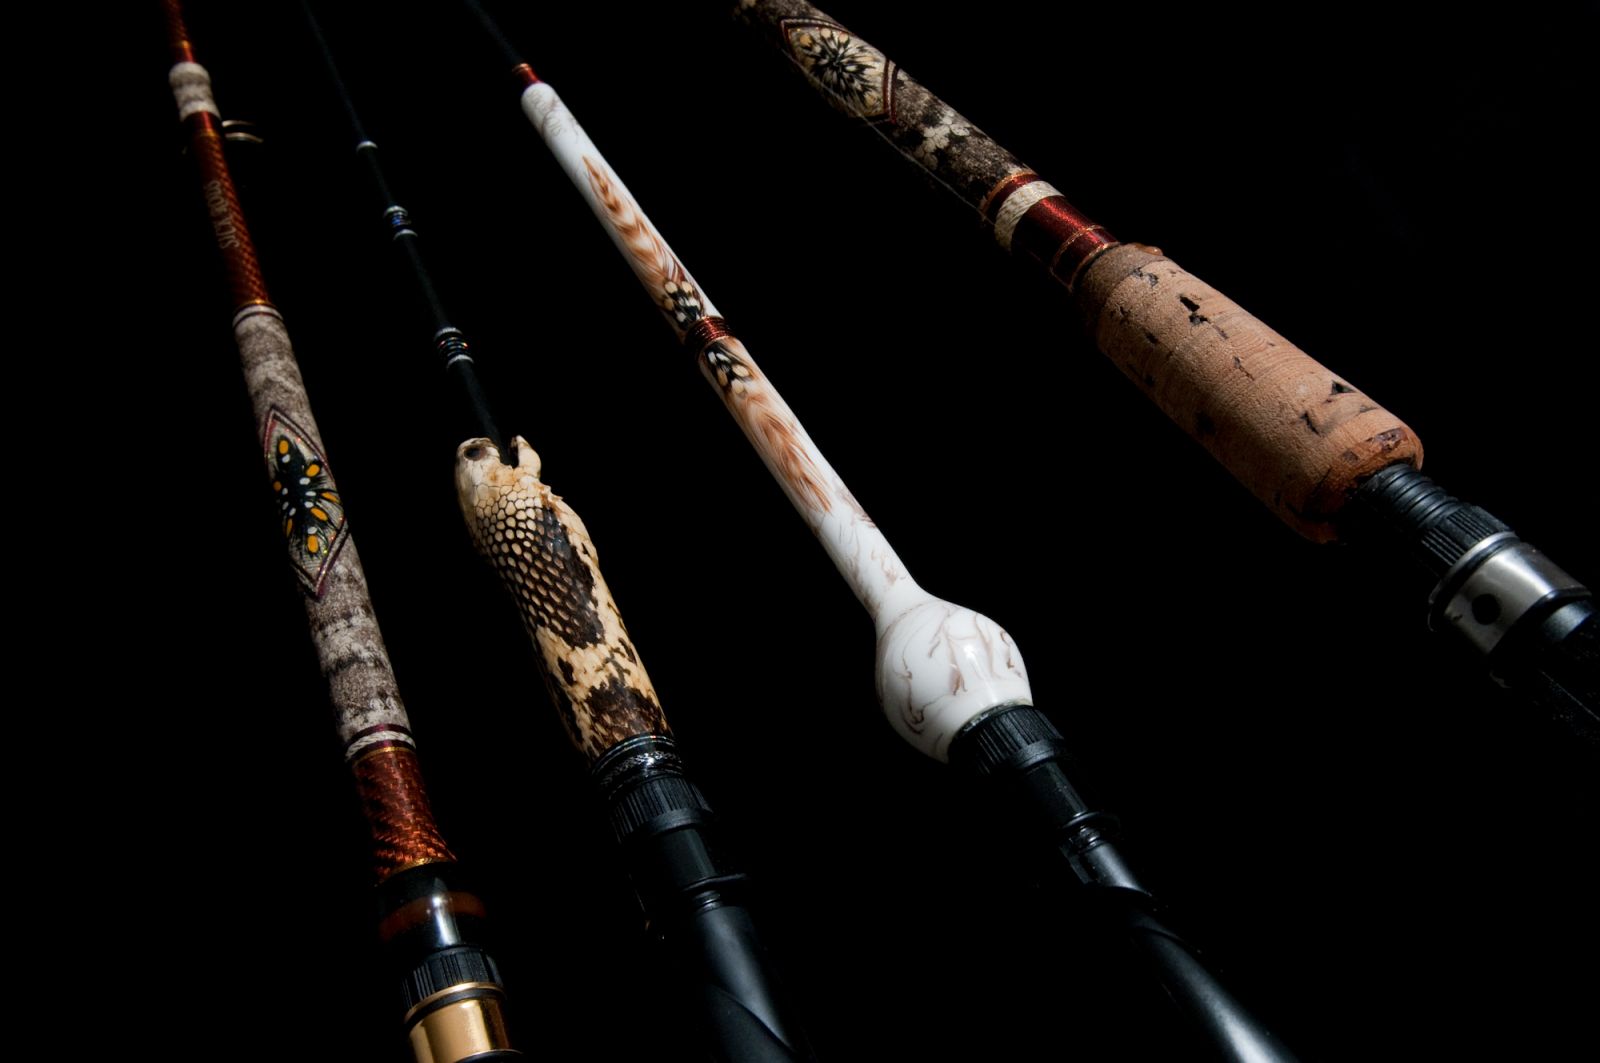 Sick Rods by Capt. Mark Laws